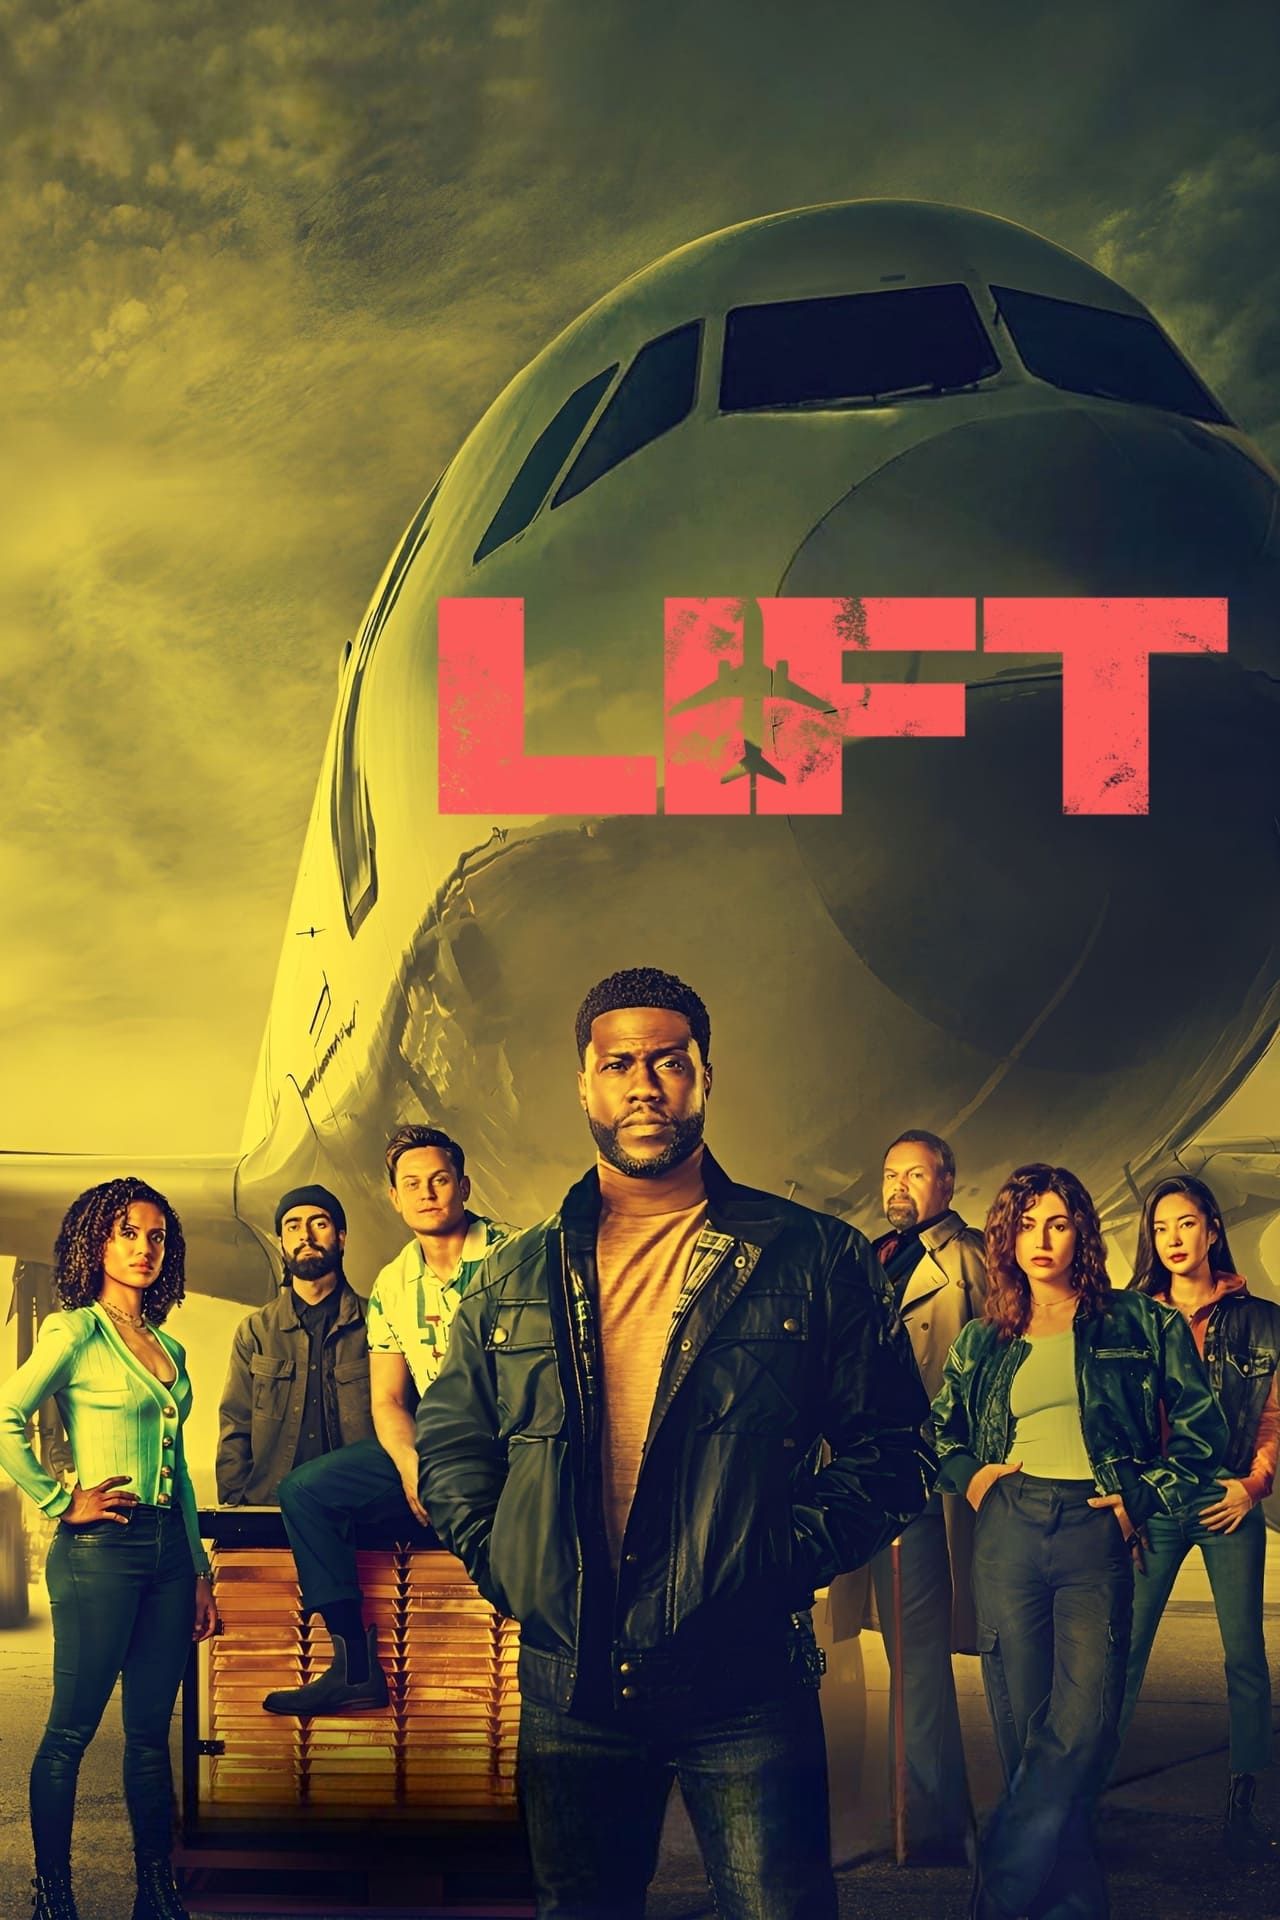 Lift Movie Poster Featuring Kevin Hart and Cast Standing in Front of a Plane